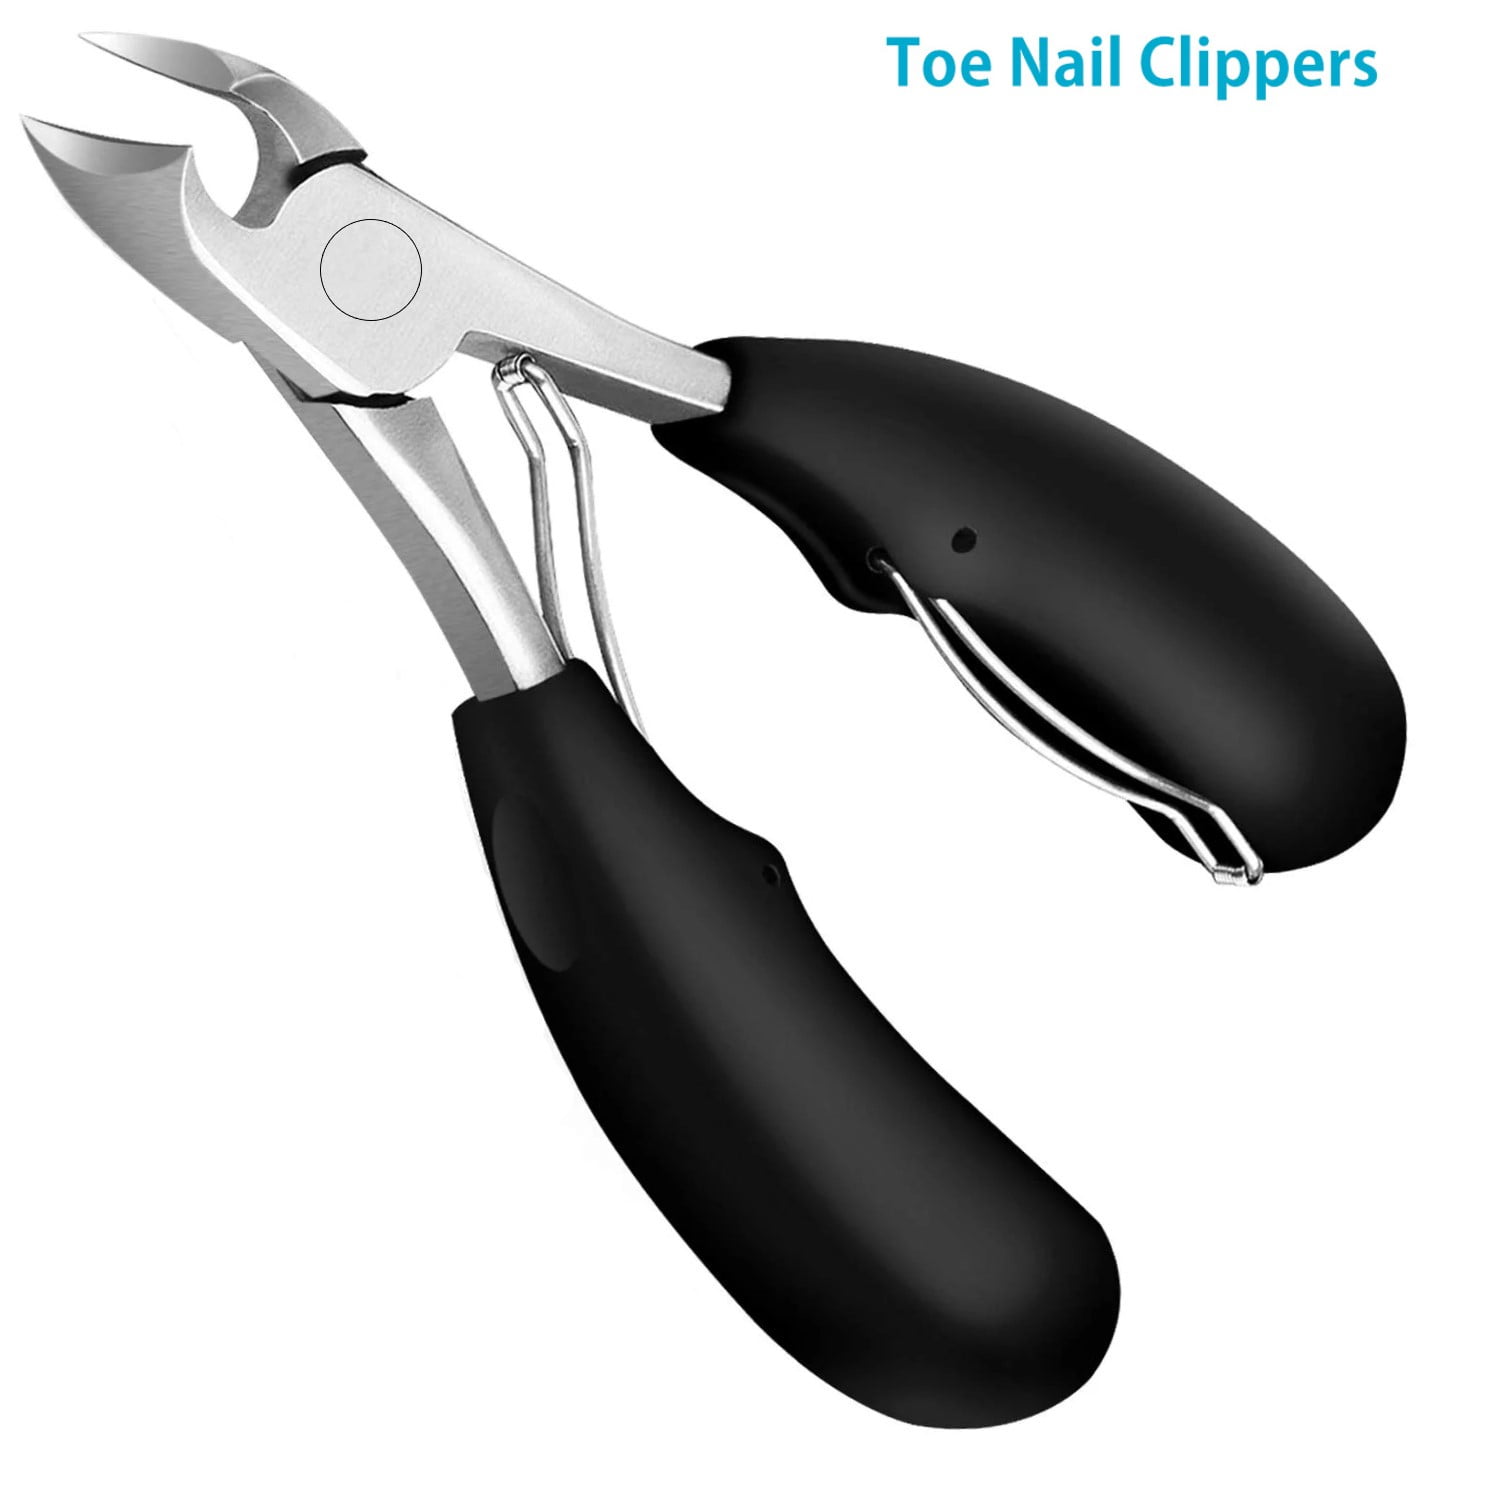 Wide Toenail Clippers For Thick Nails 17mm Wide Jaw Opening Extra Large Nail  Clippers For Thick Toenails, Big Nail Clippers For Men And Seniors, Stain